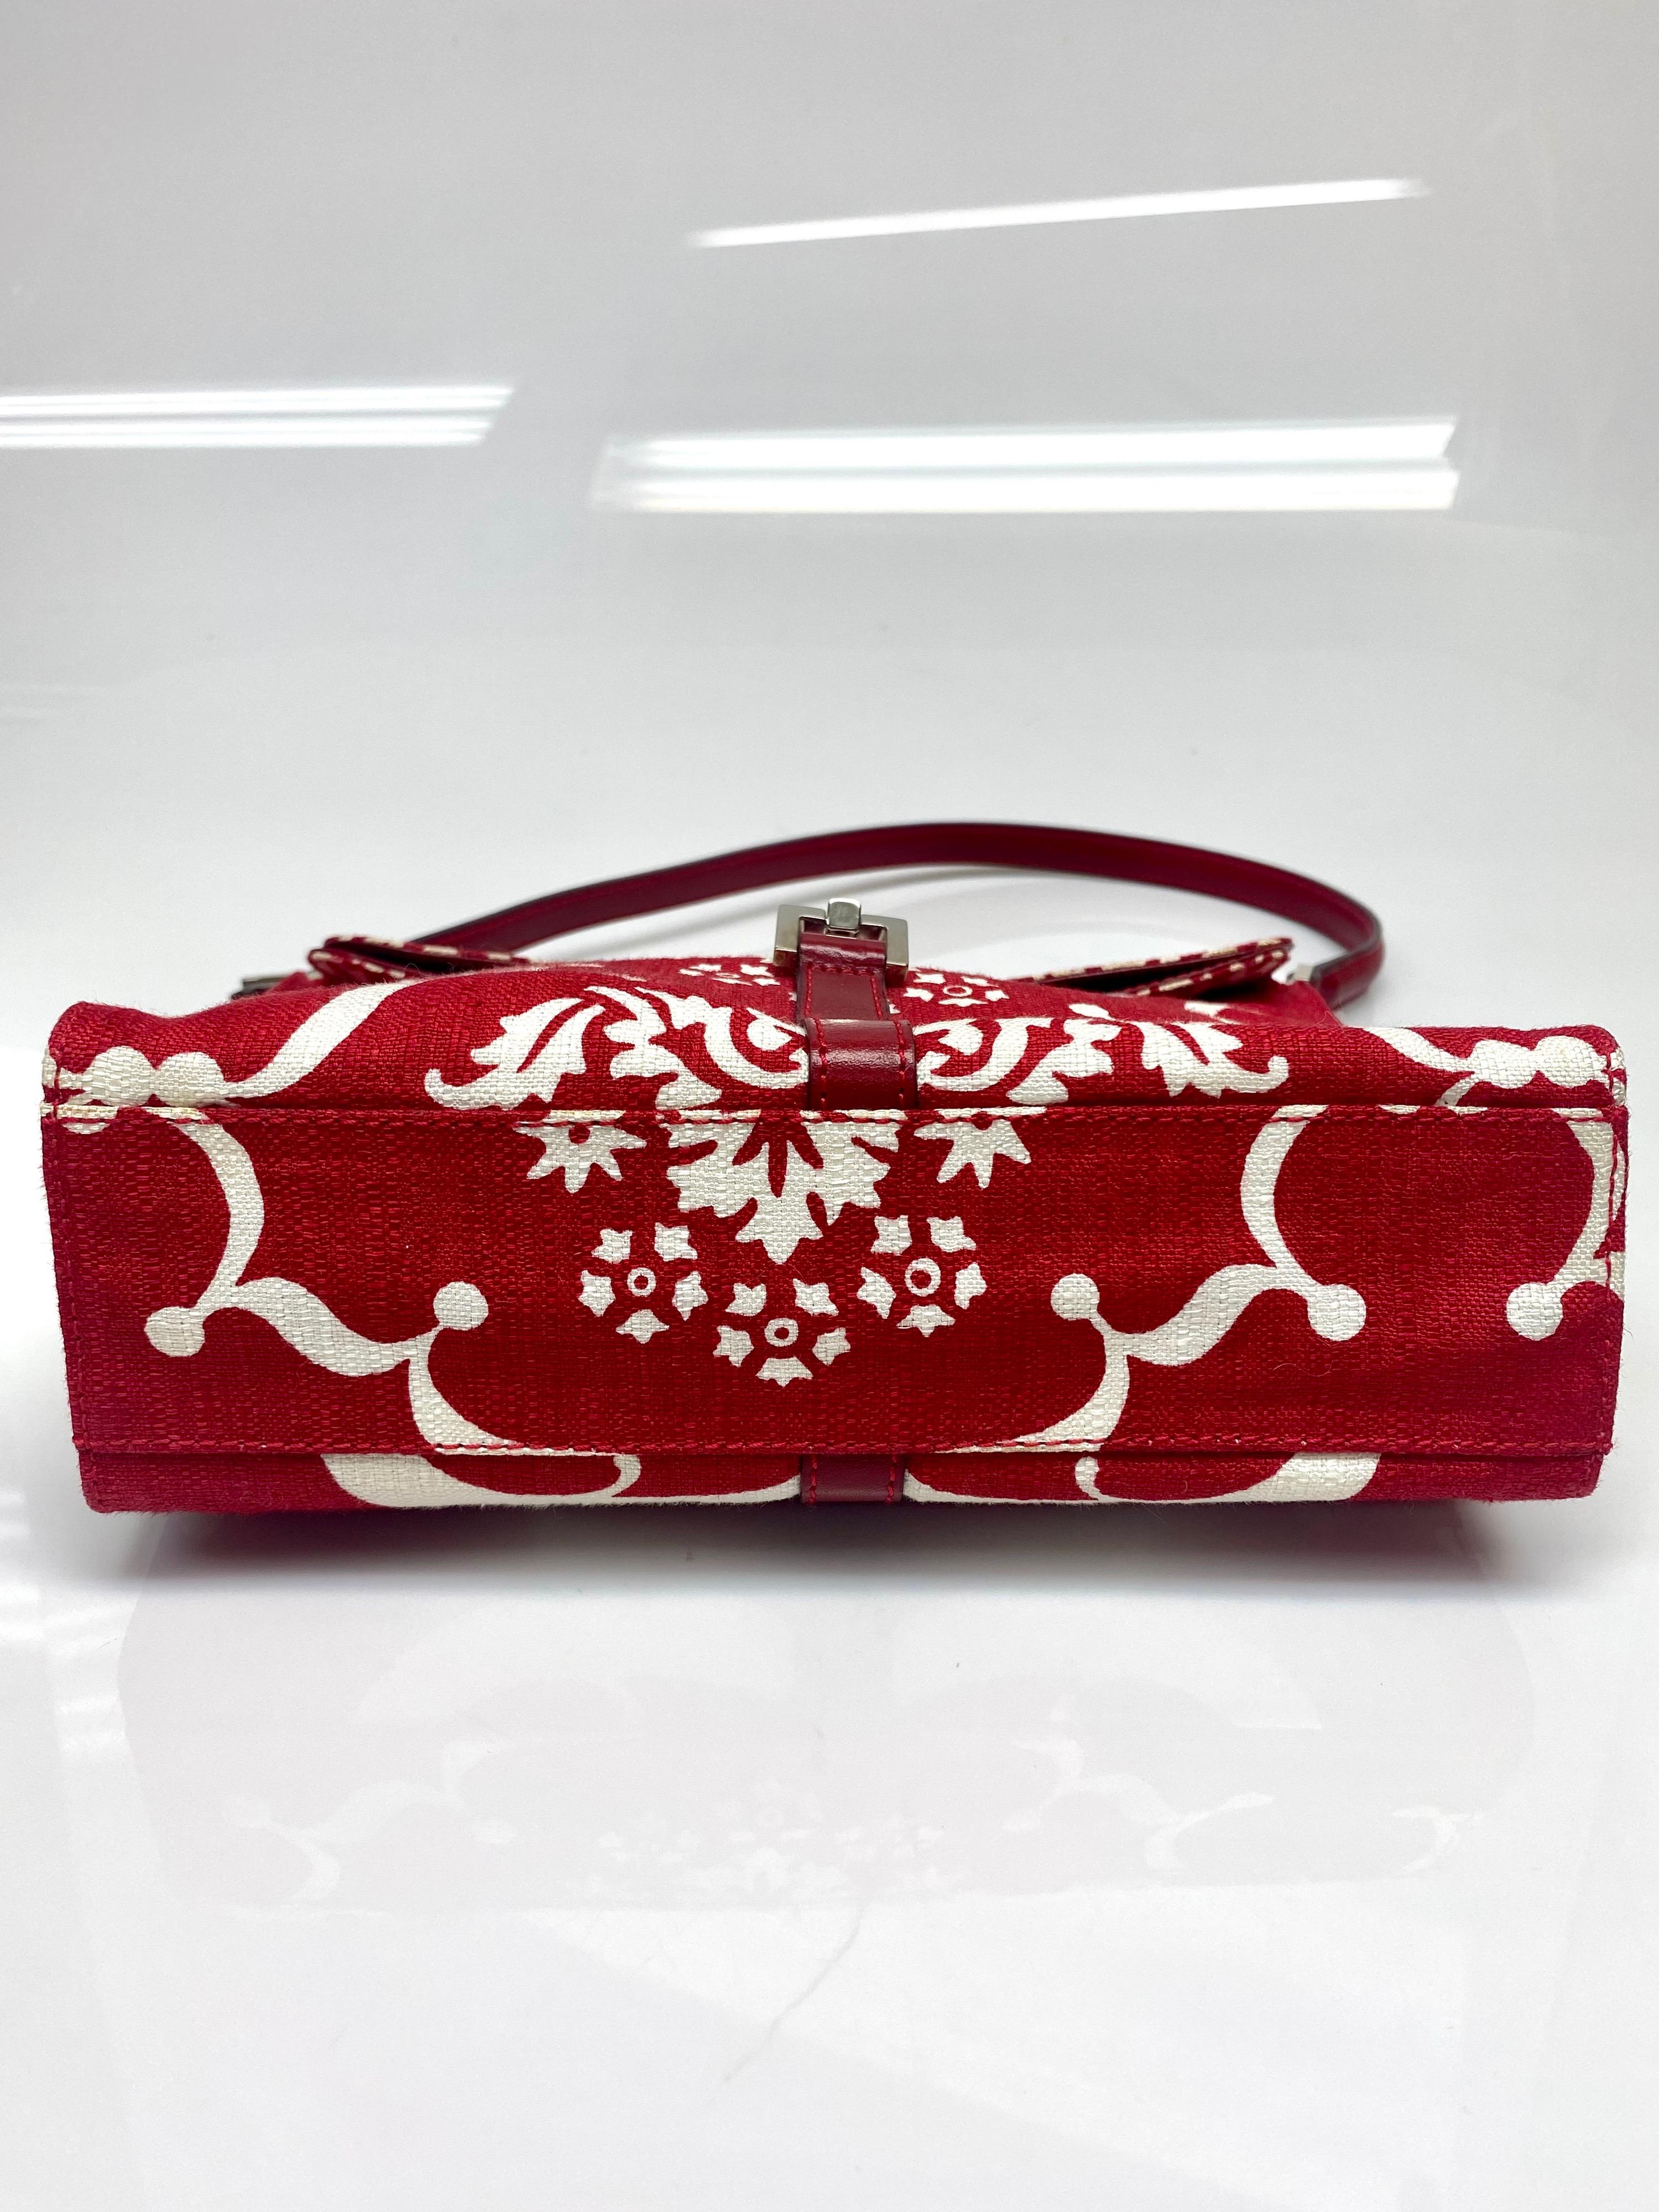 Gucci Fabric Printed Leather Red and White Bag 4